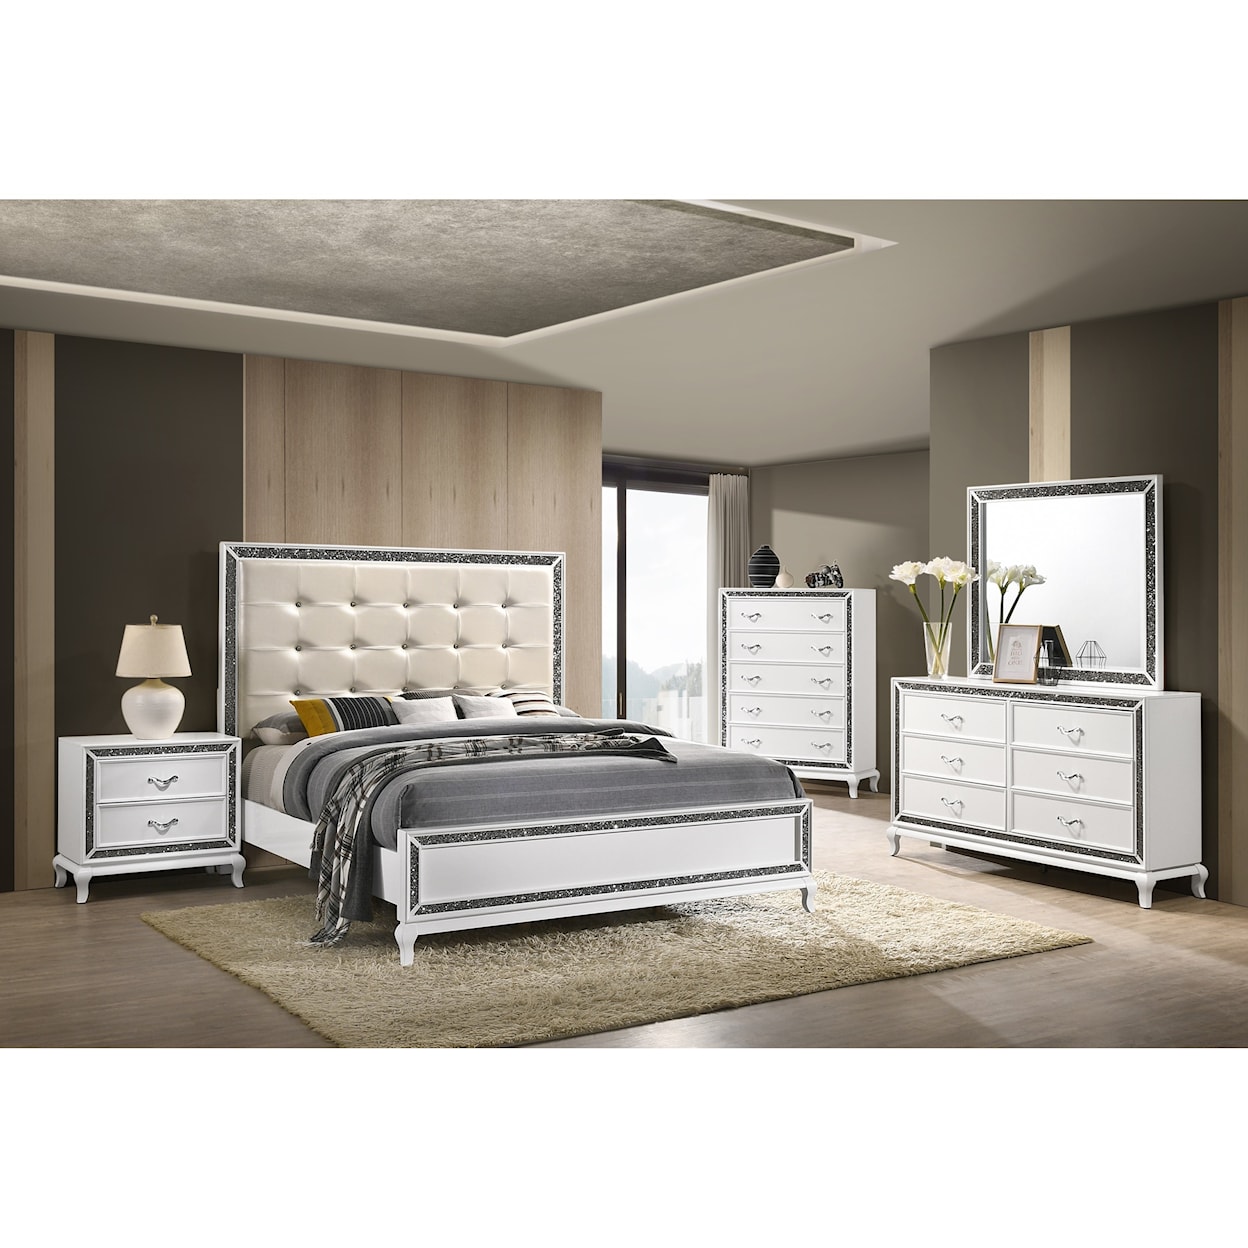 New Classic Park Imperial Twin Bedroom Group